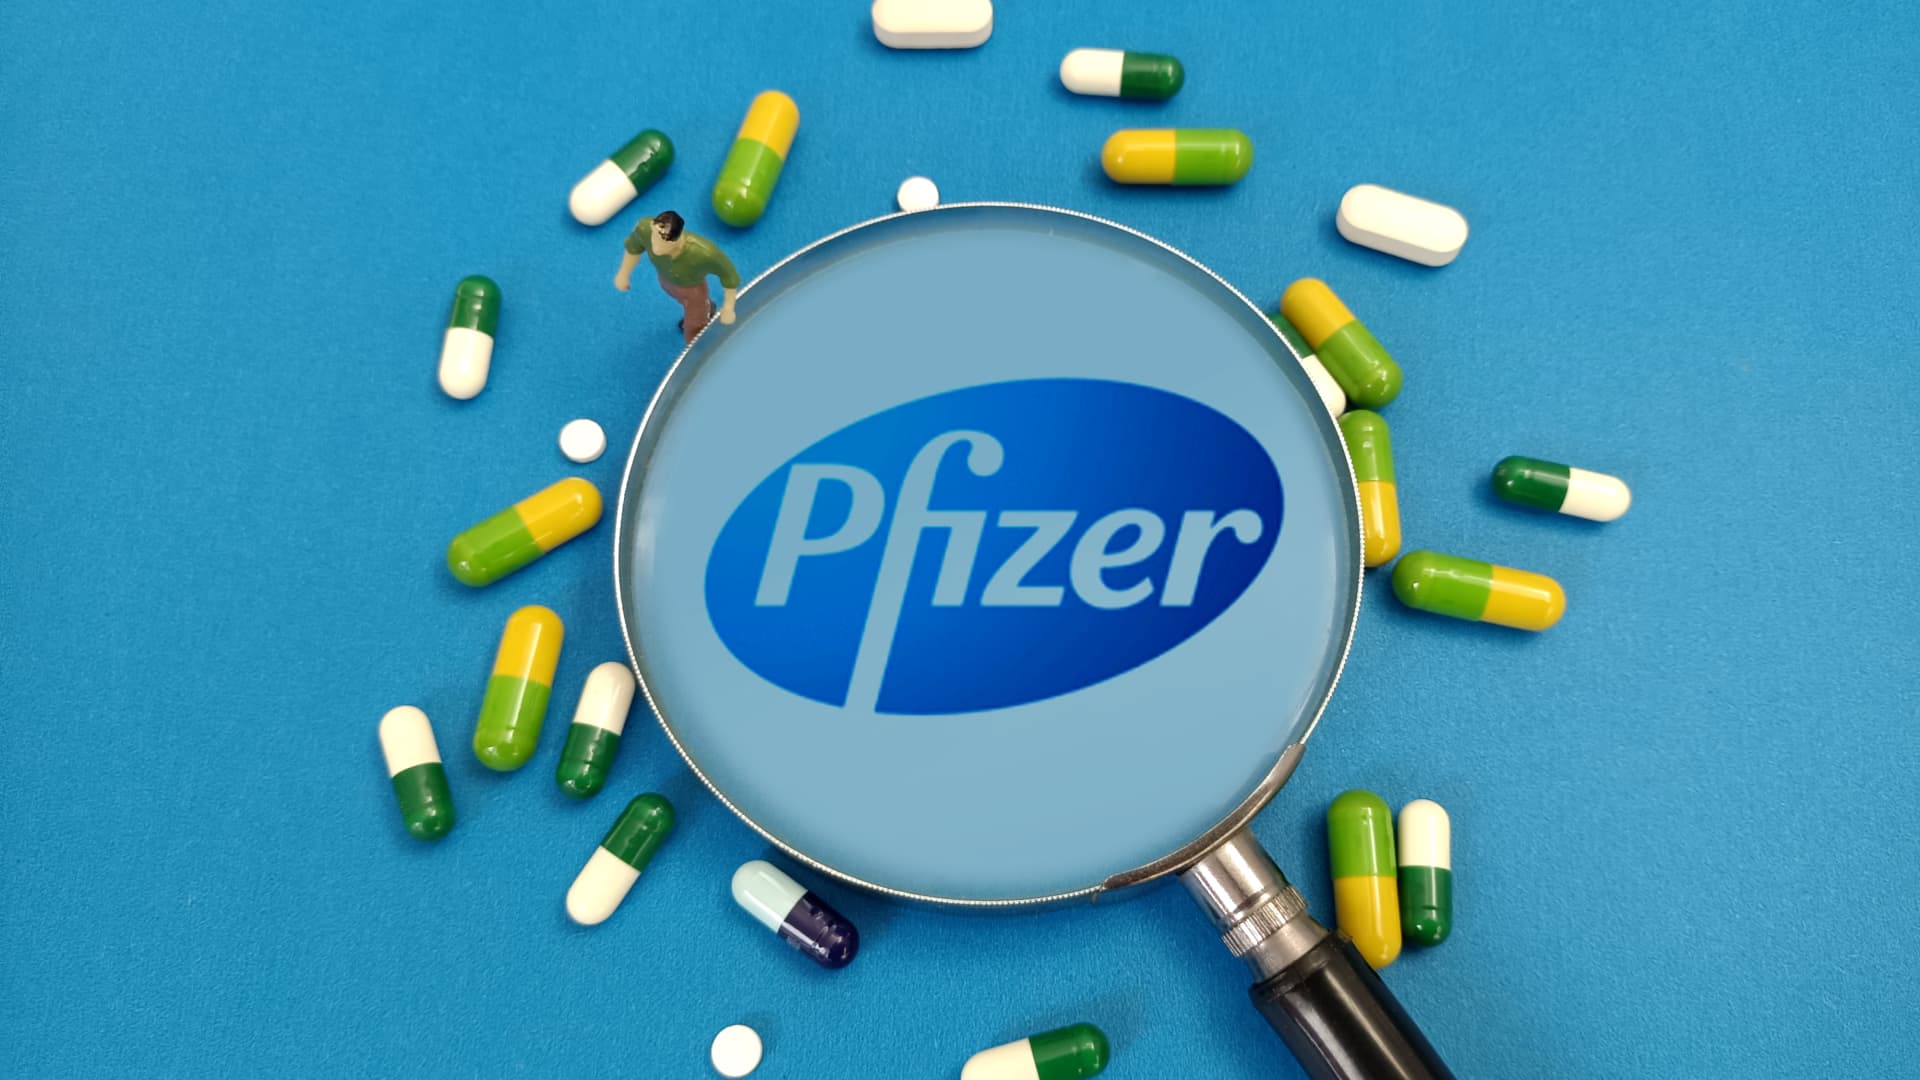 Pfizer lung cancer drug shows promising long-term trial results